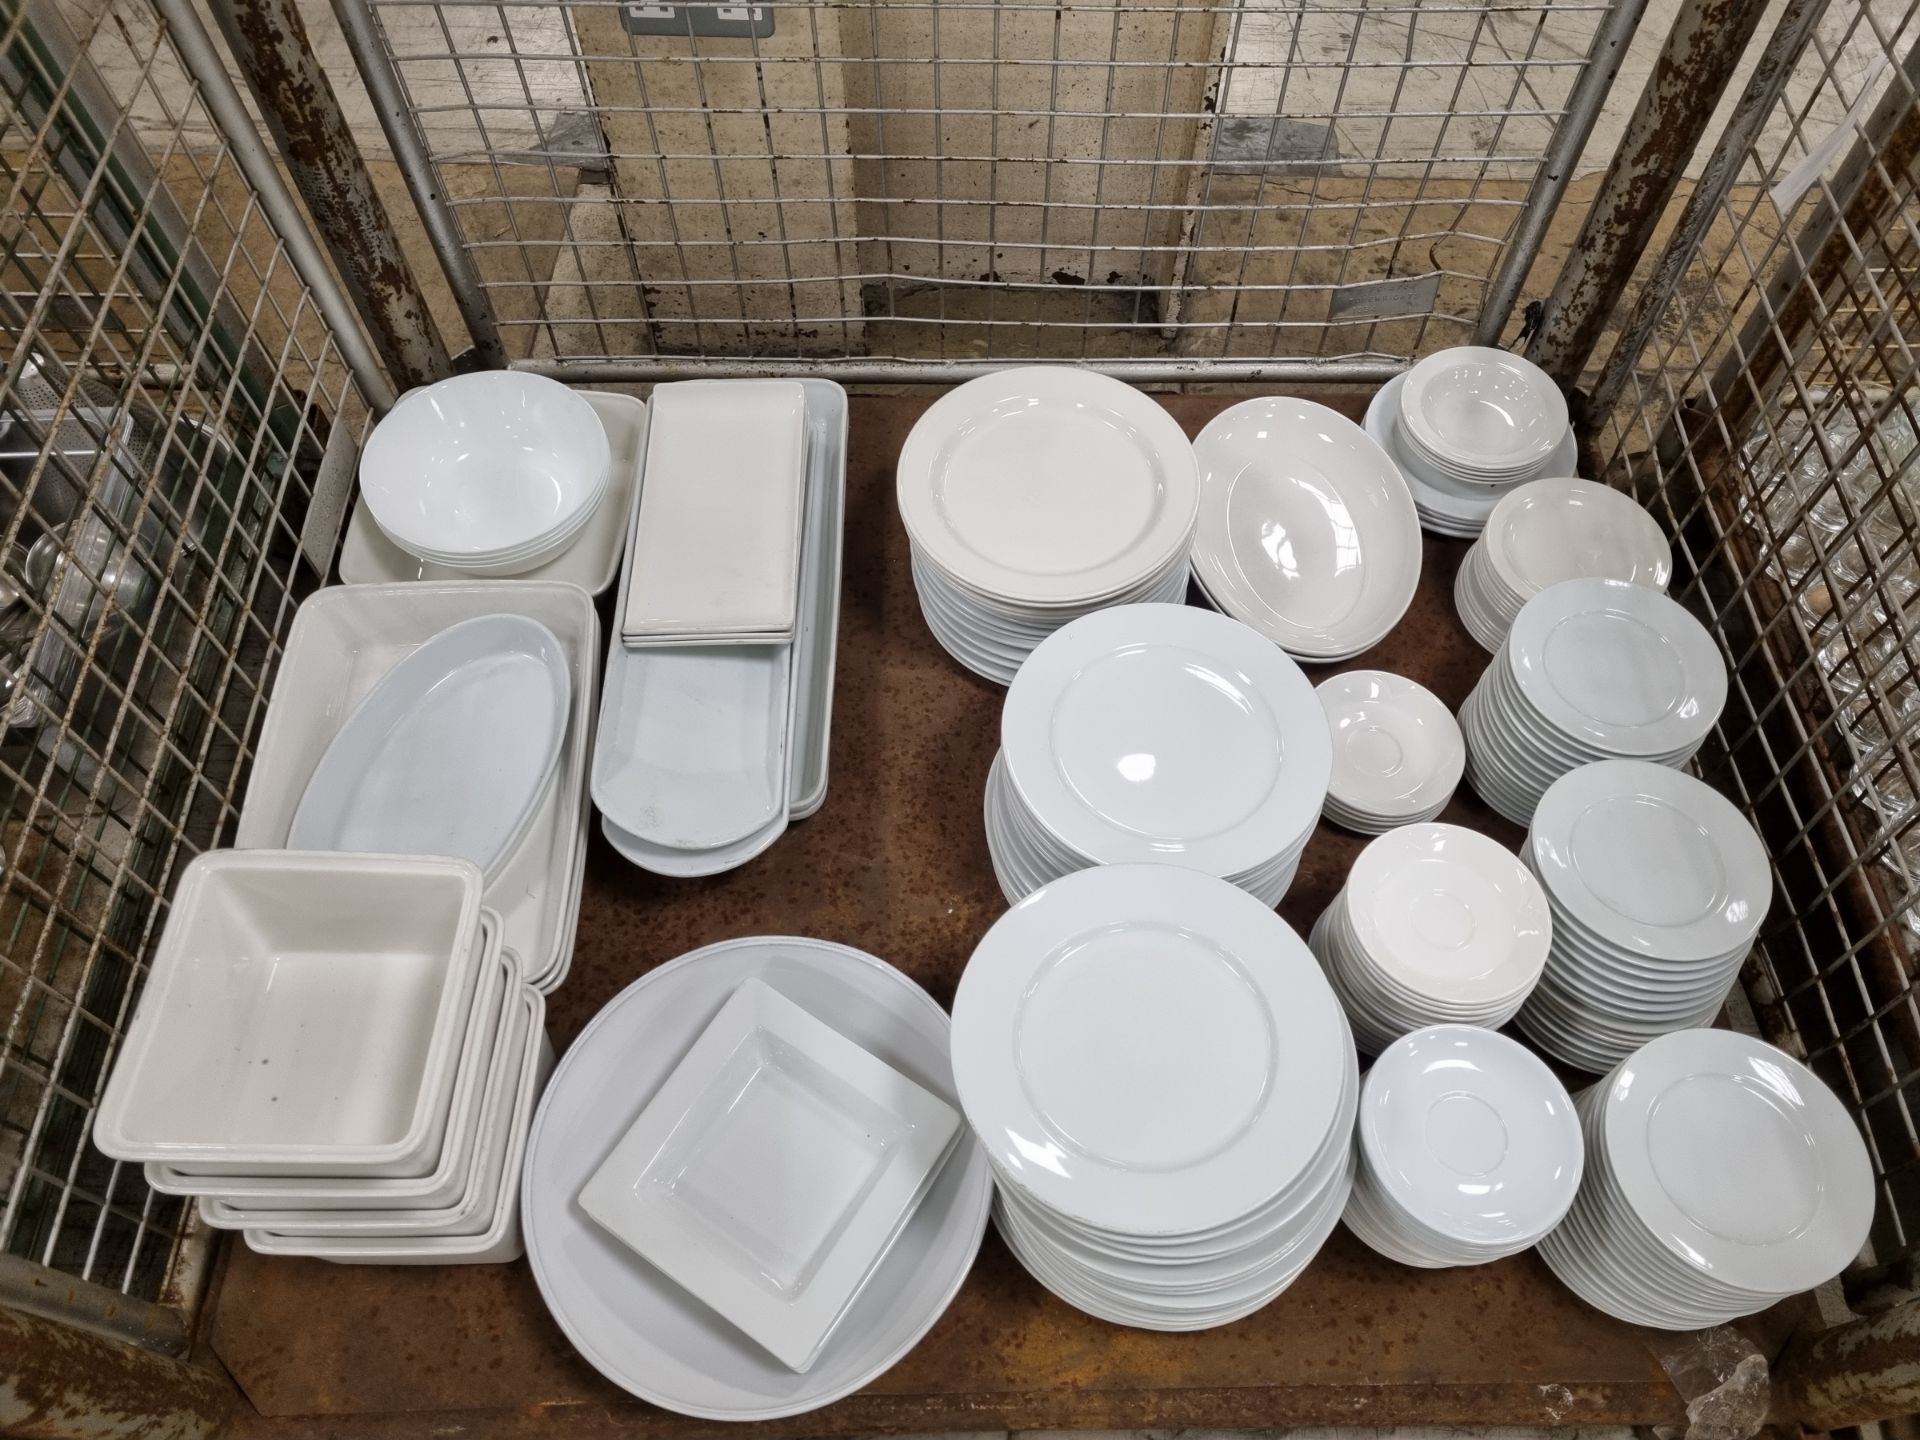 Catering equipment and supplies consisting of crockery, plates, saucers, bowls, trays - Image 2 of 2